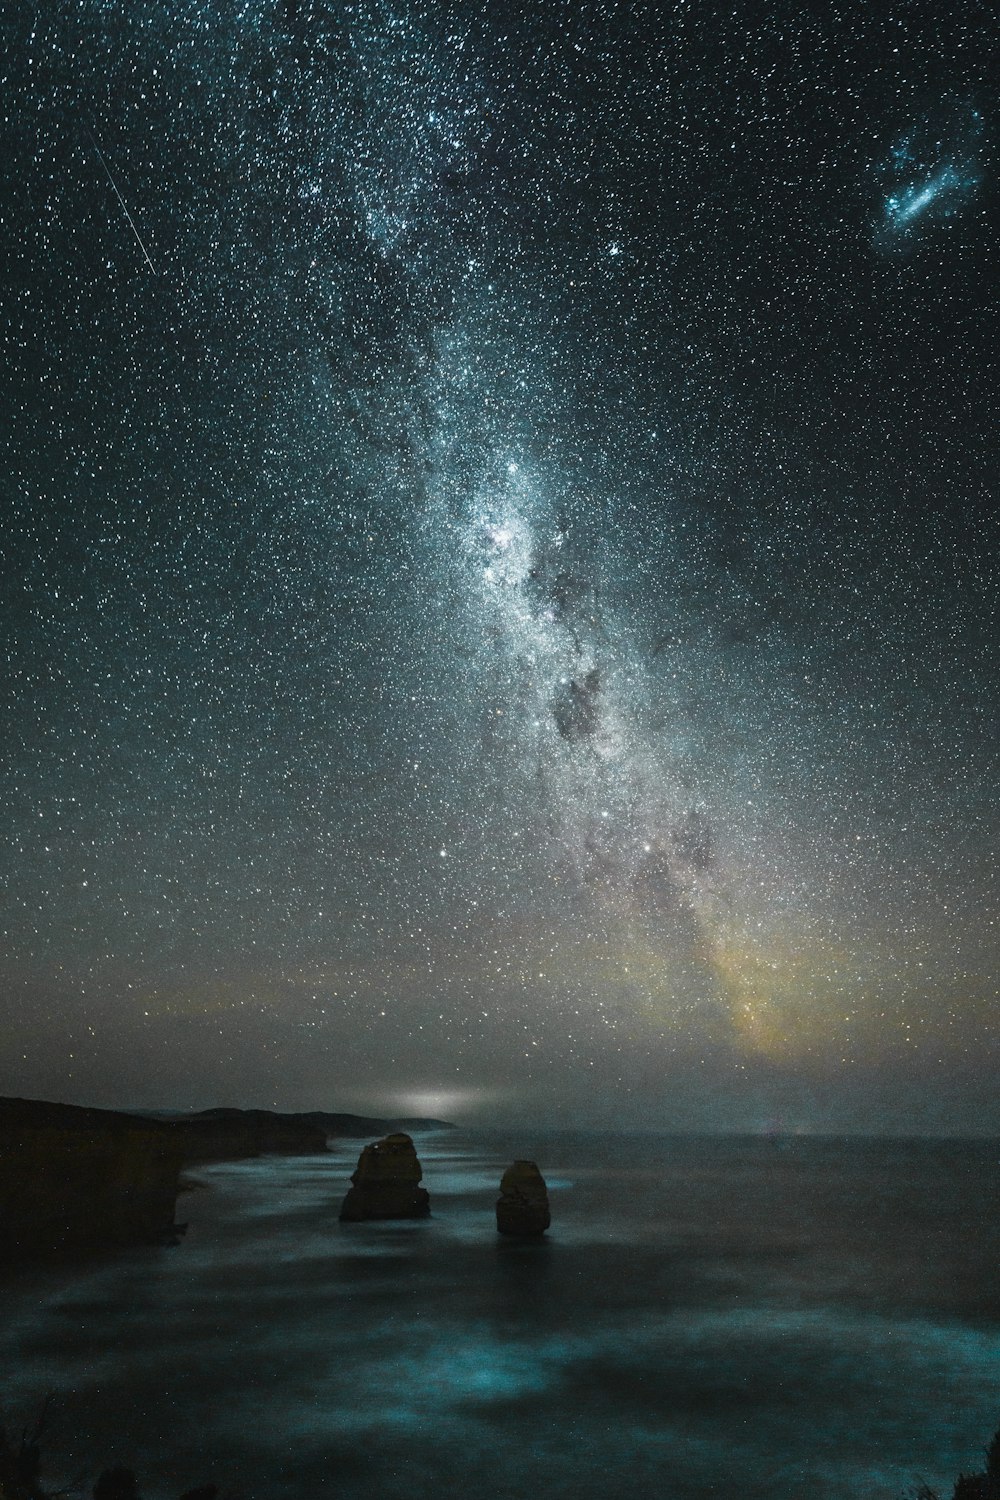 rock formation near shore during starry night